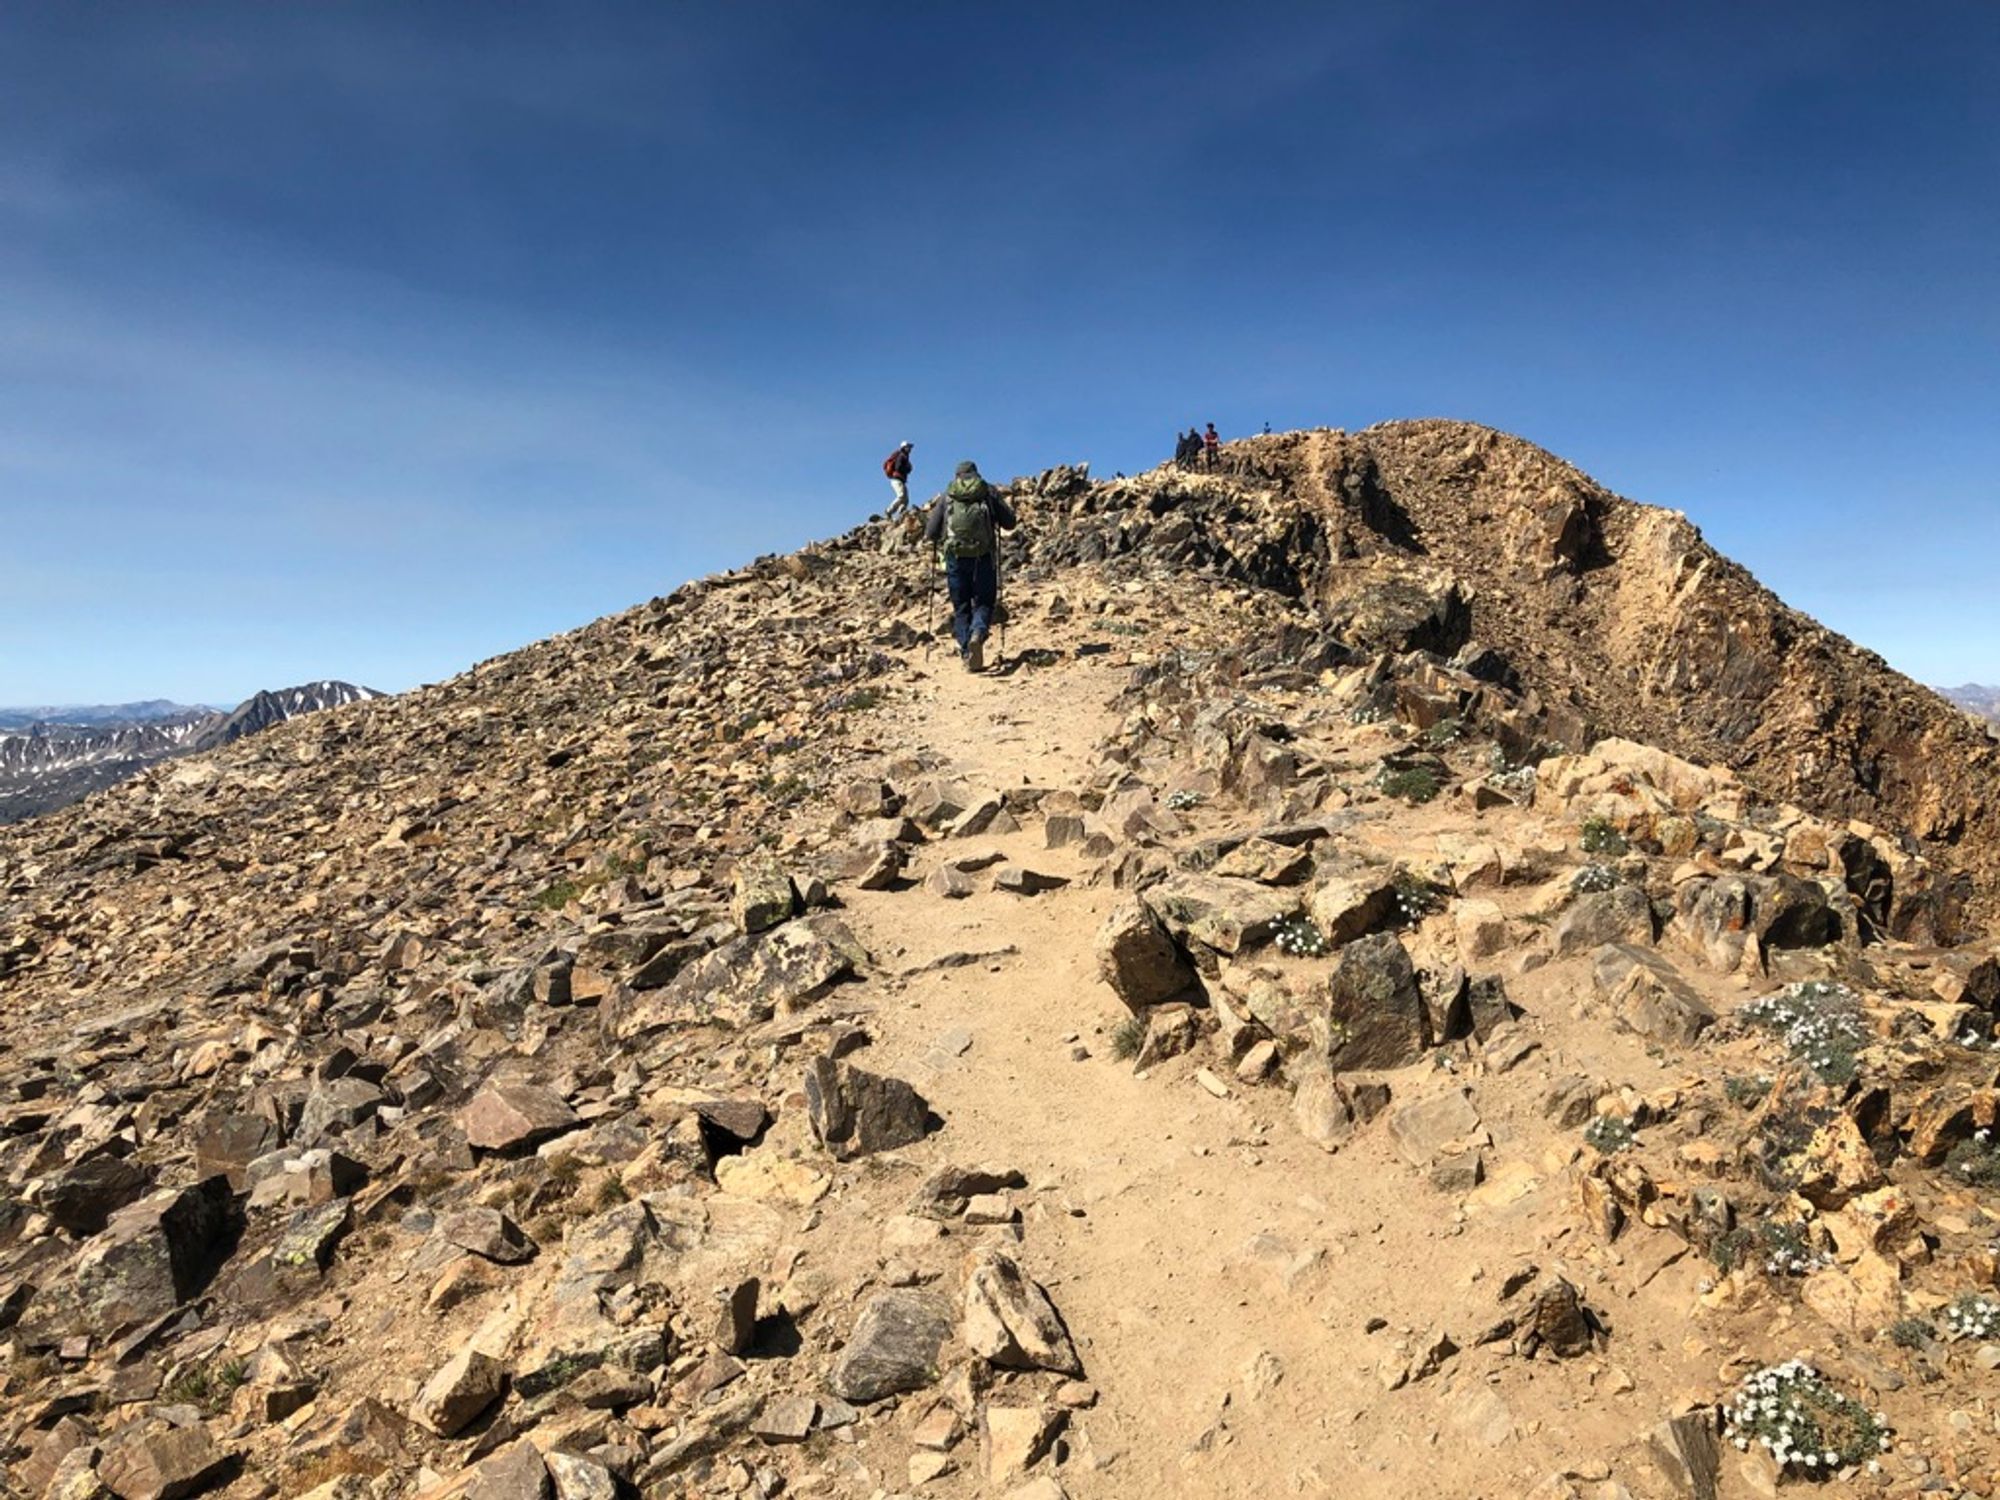 View of the rocky trail, almost at the summit